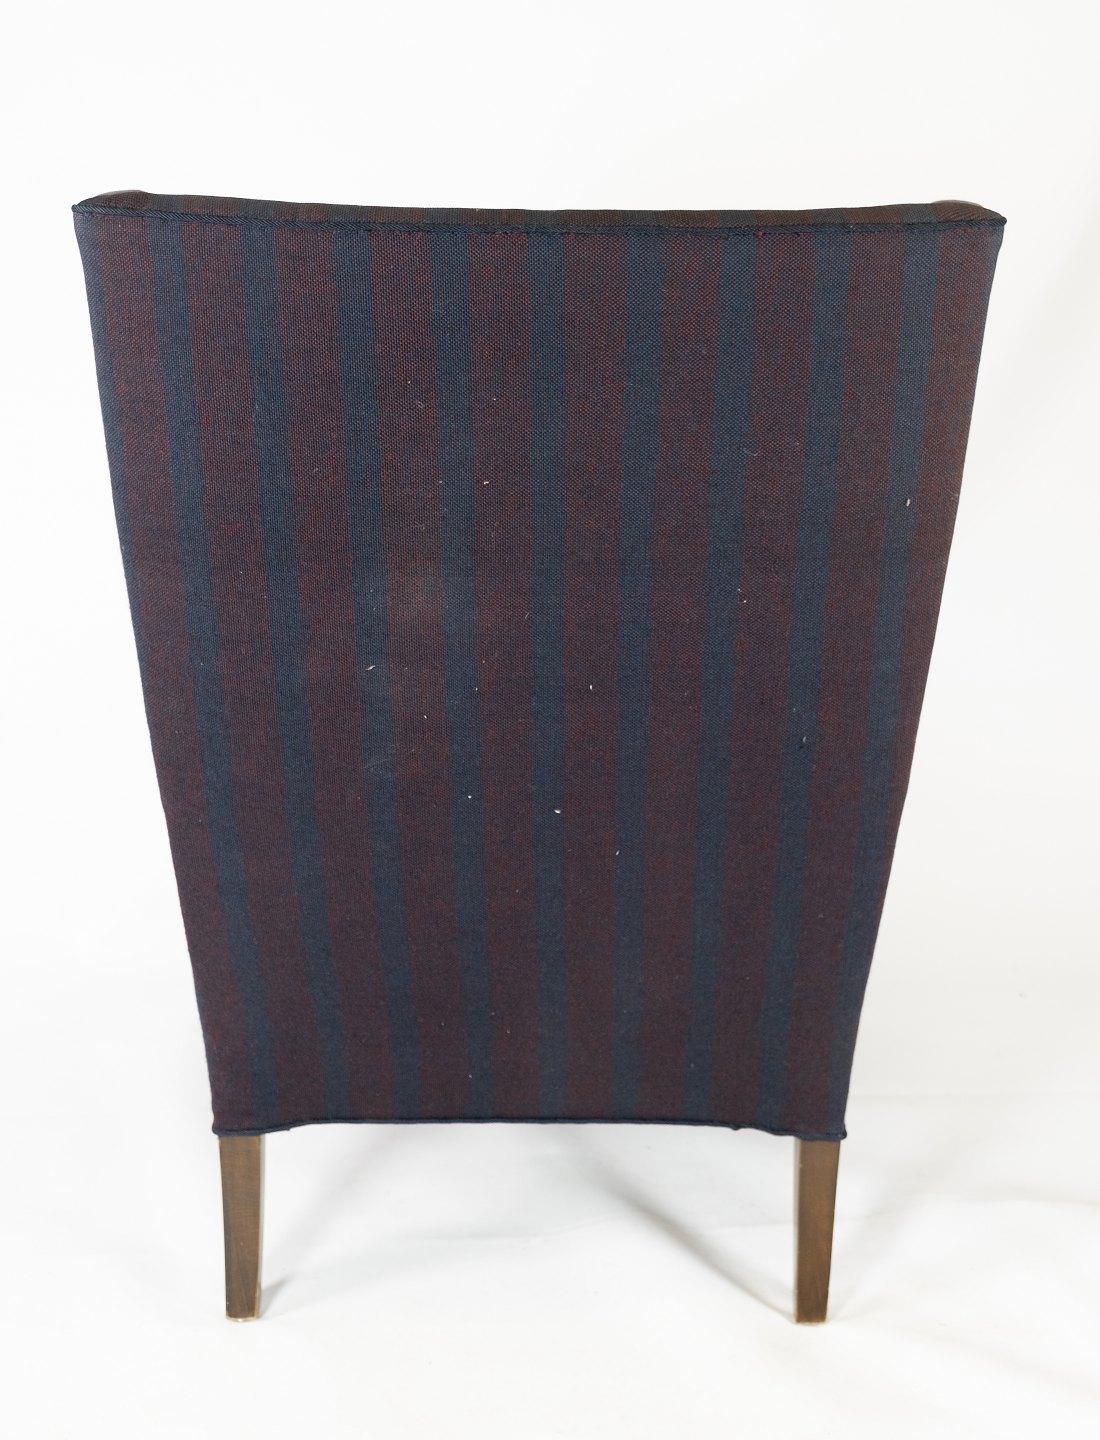 Tall Easy Chair with Dark Striped Fabric, in Great Vintage Condition For Sale 1